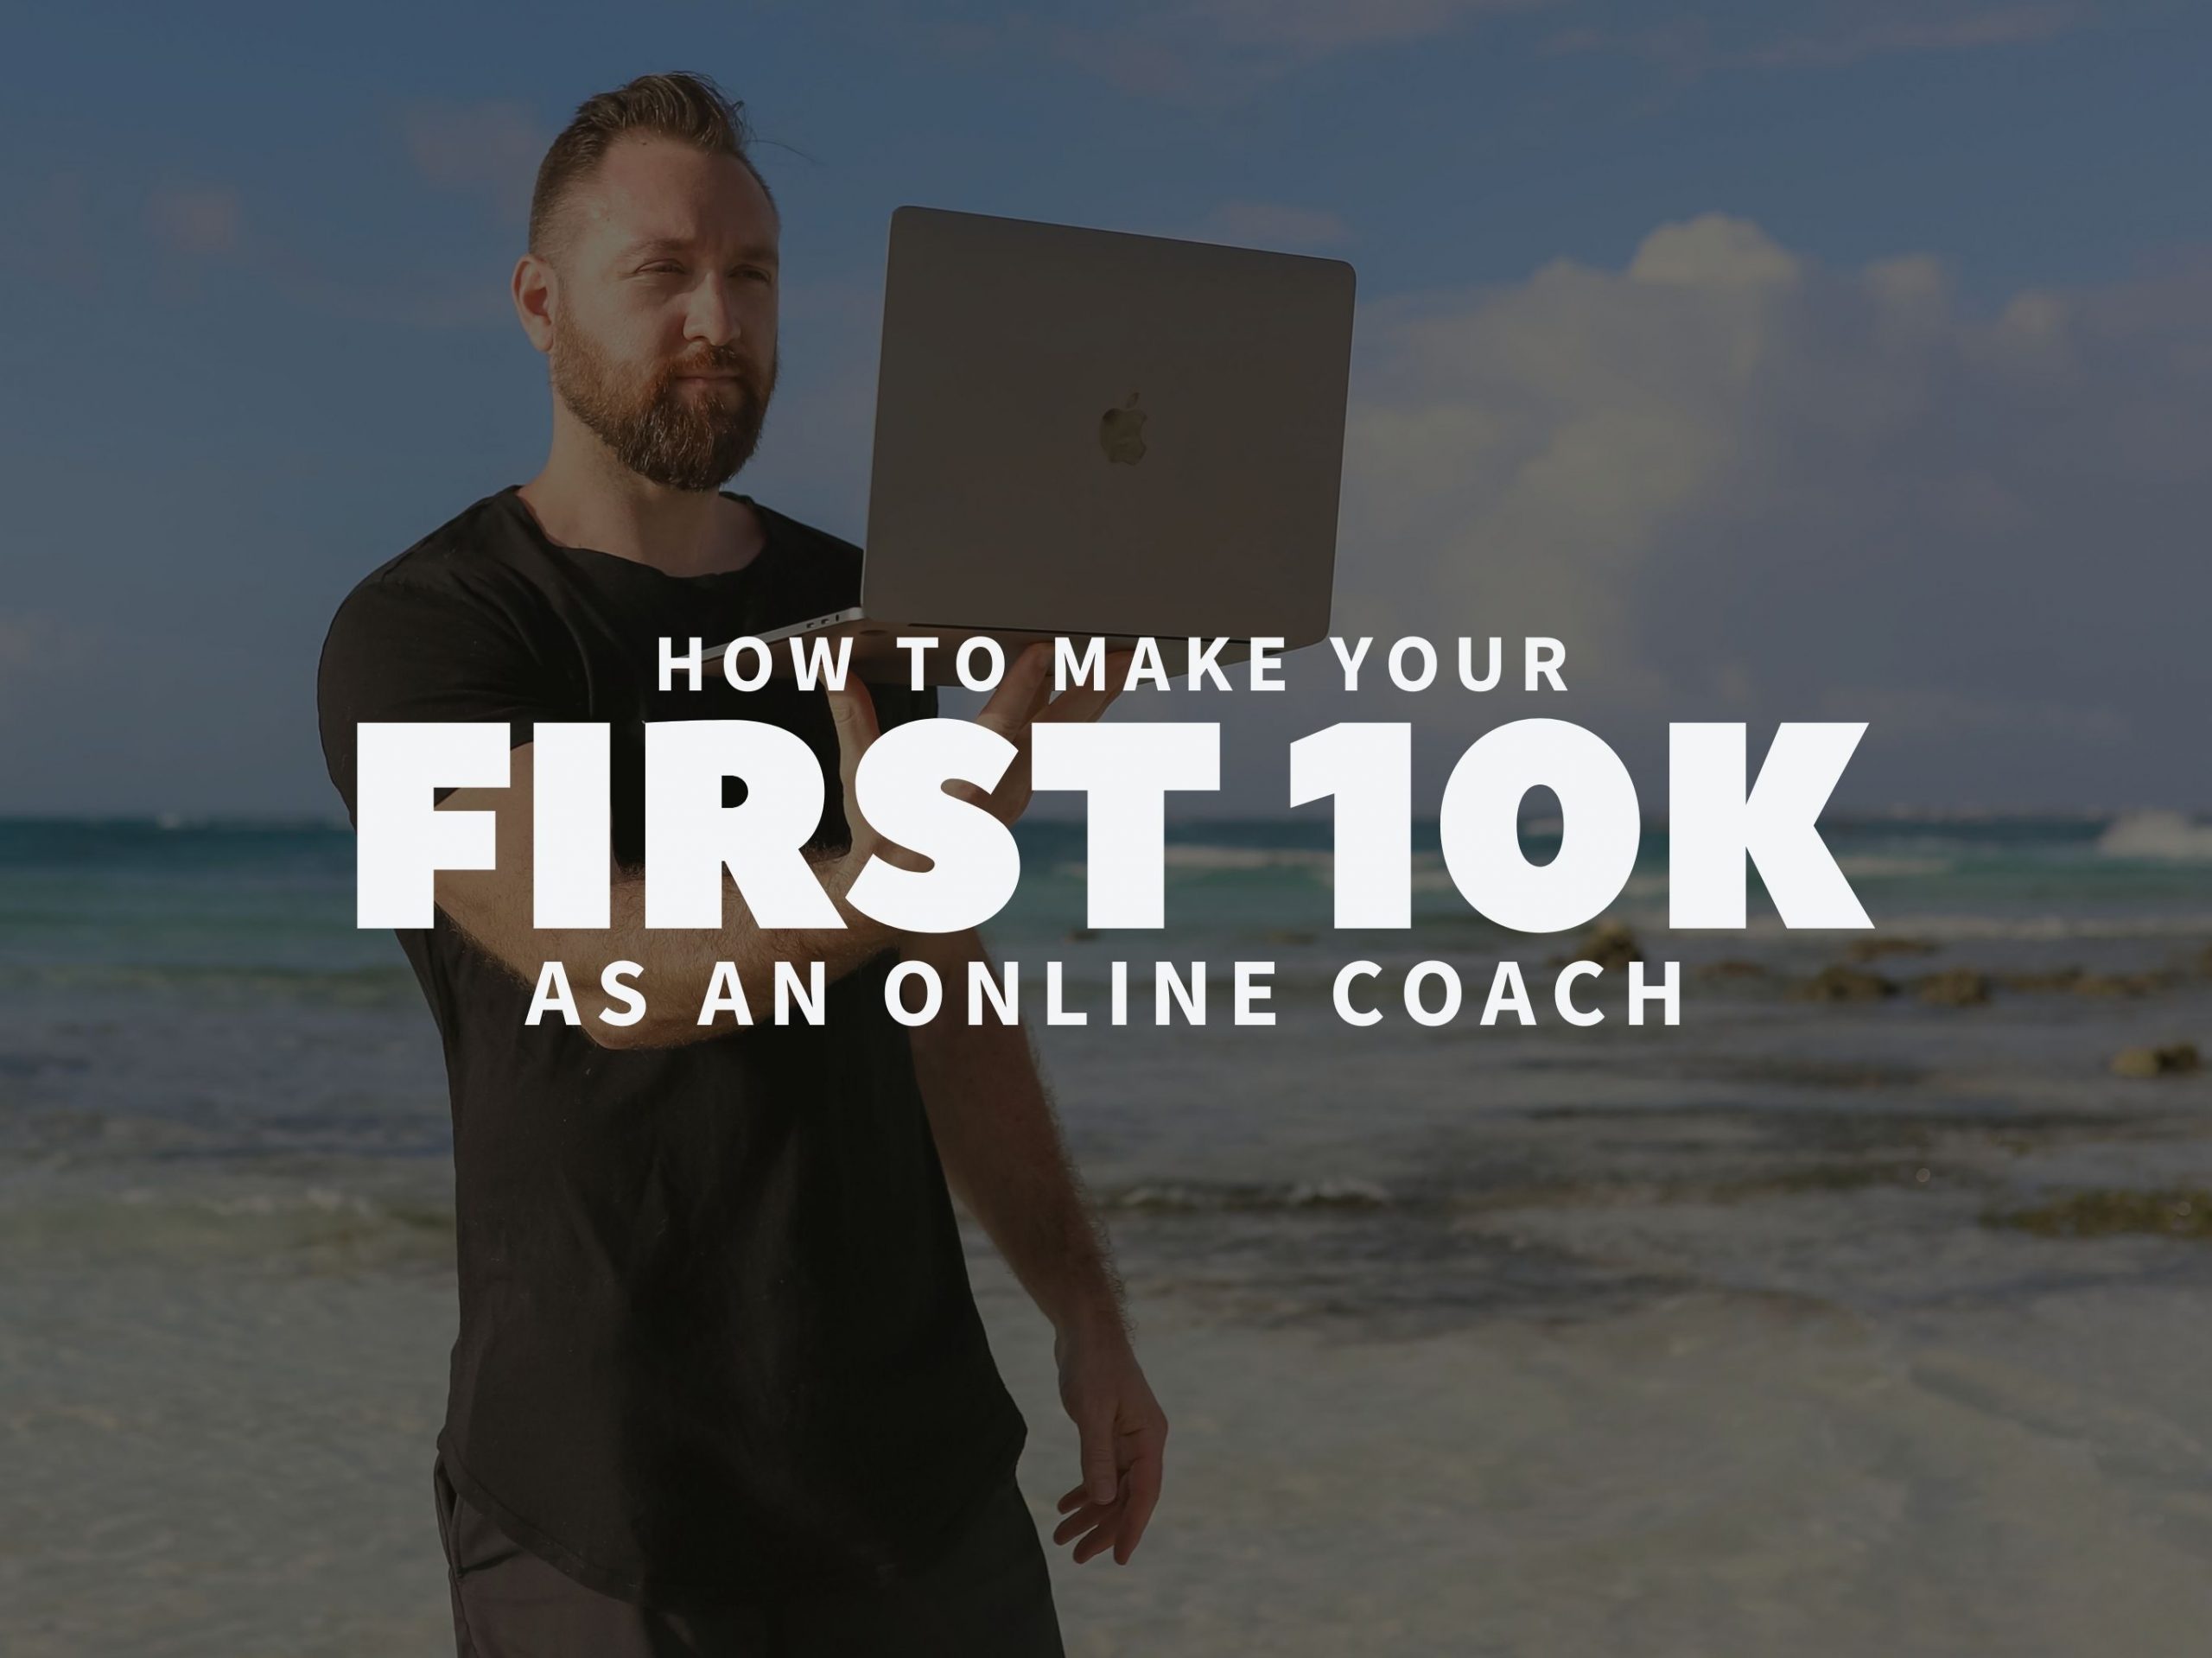 0-100k A MONTH FREE TRAINING!